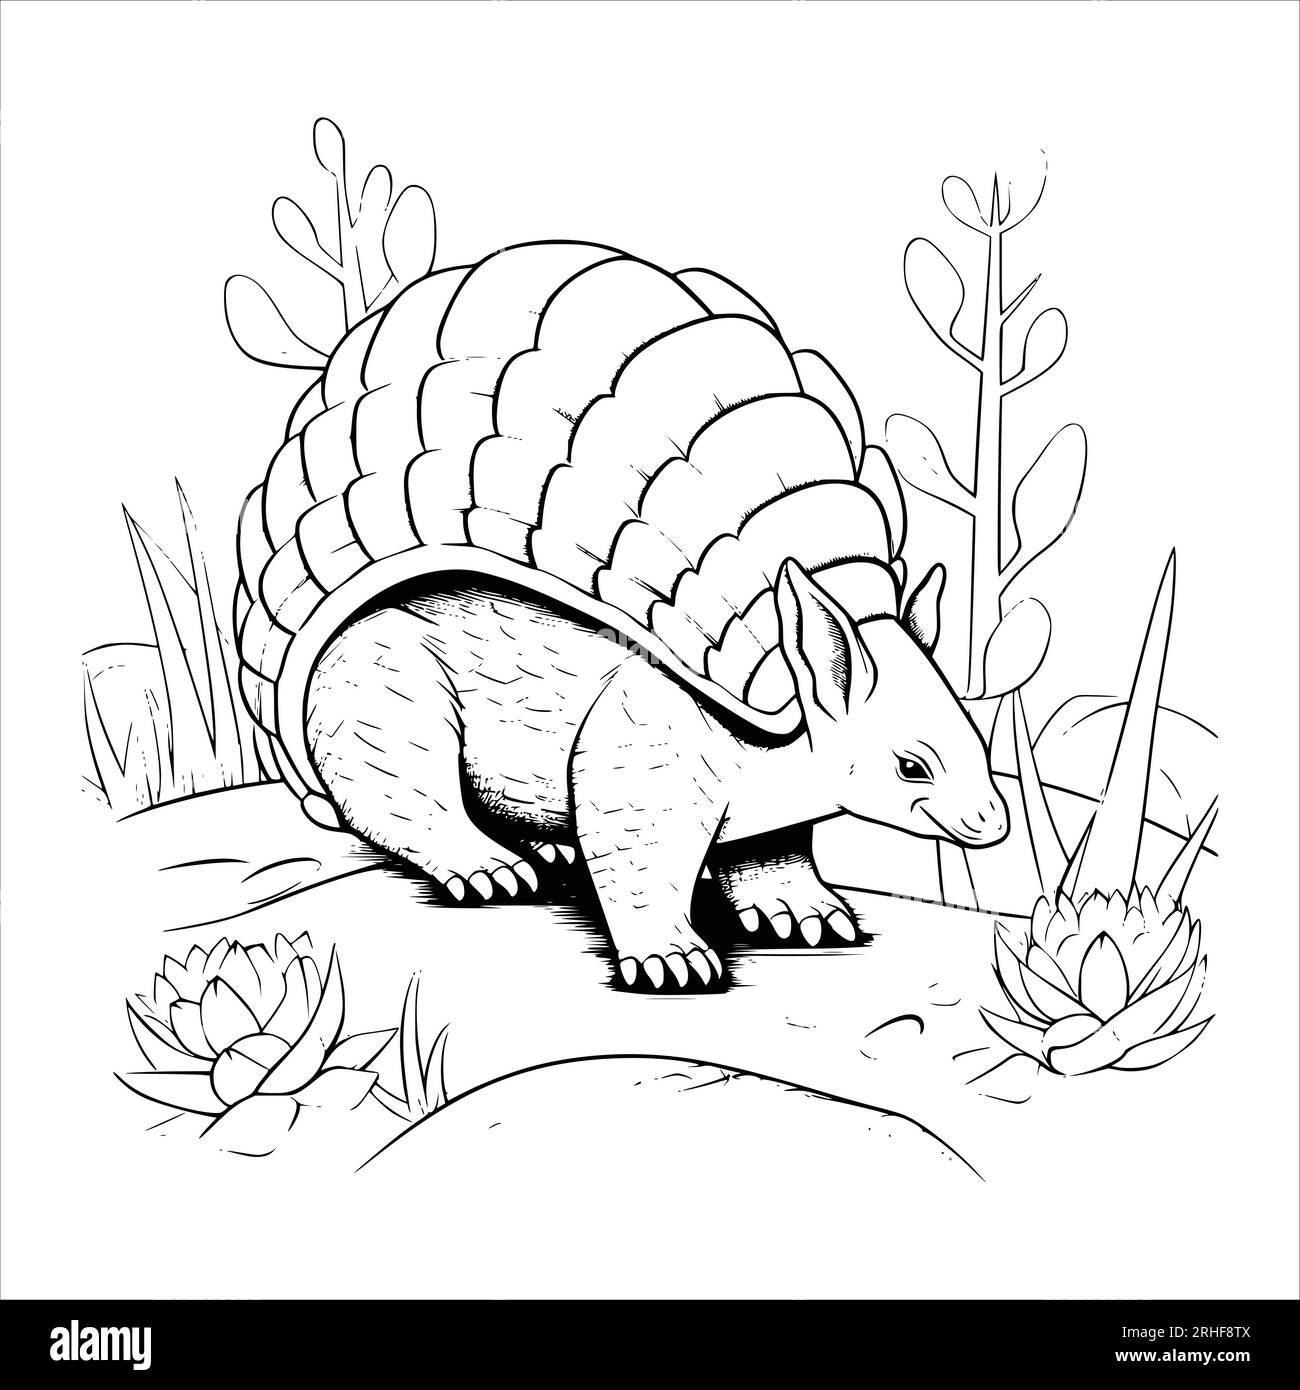 Armadillo Coloring Page For Kids Stock Vector Image & Art - Alamy